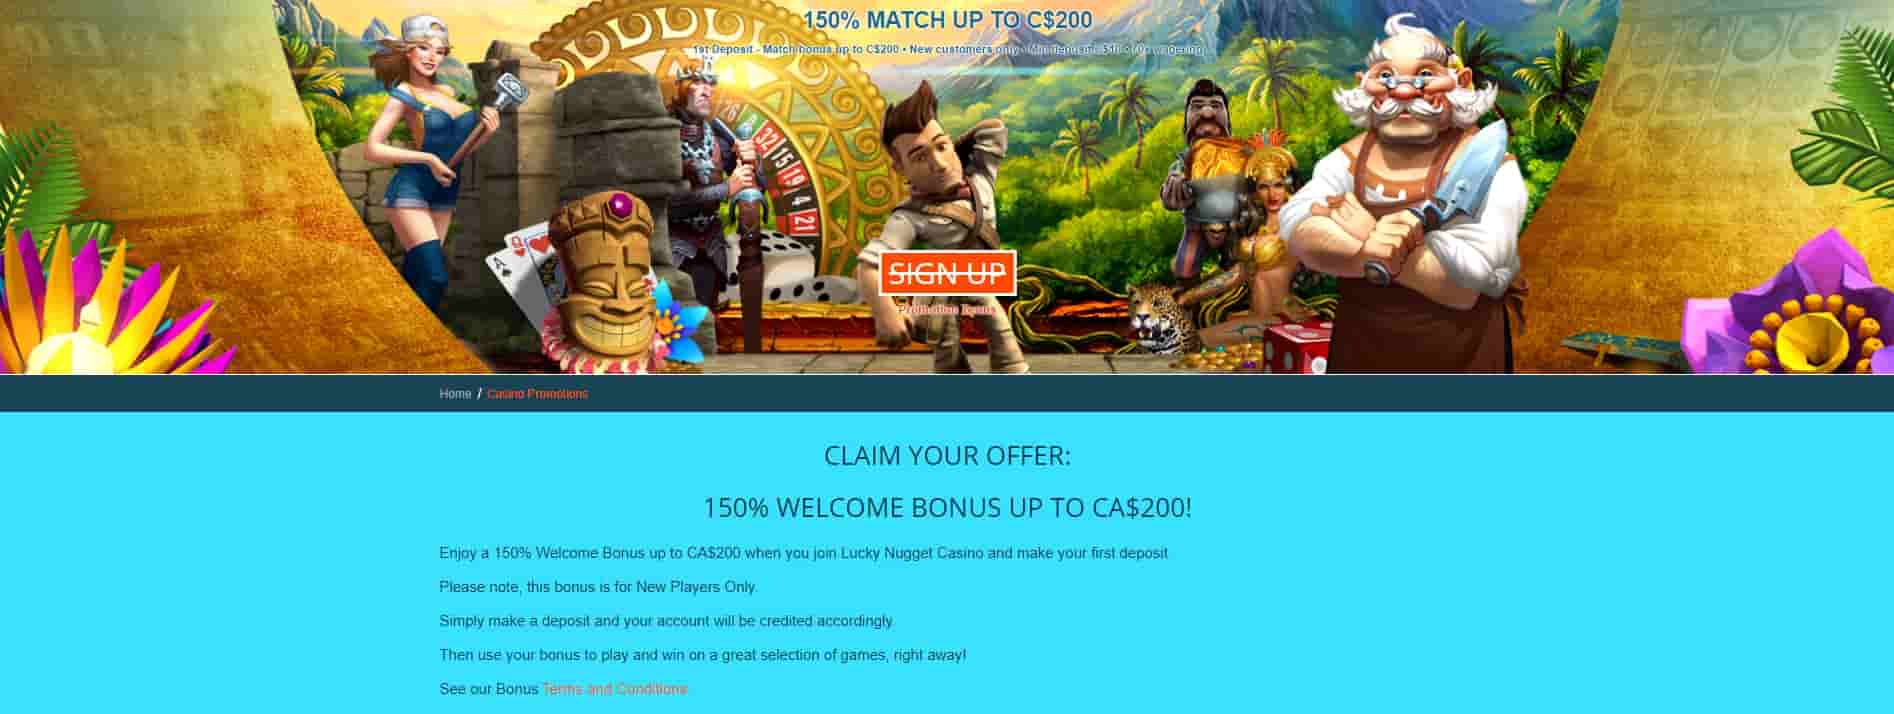 Lucky Nugget Online Casino Promotions